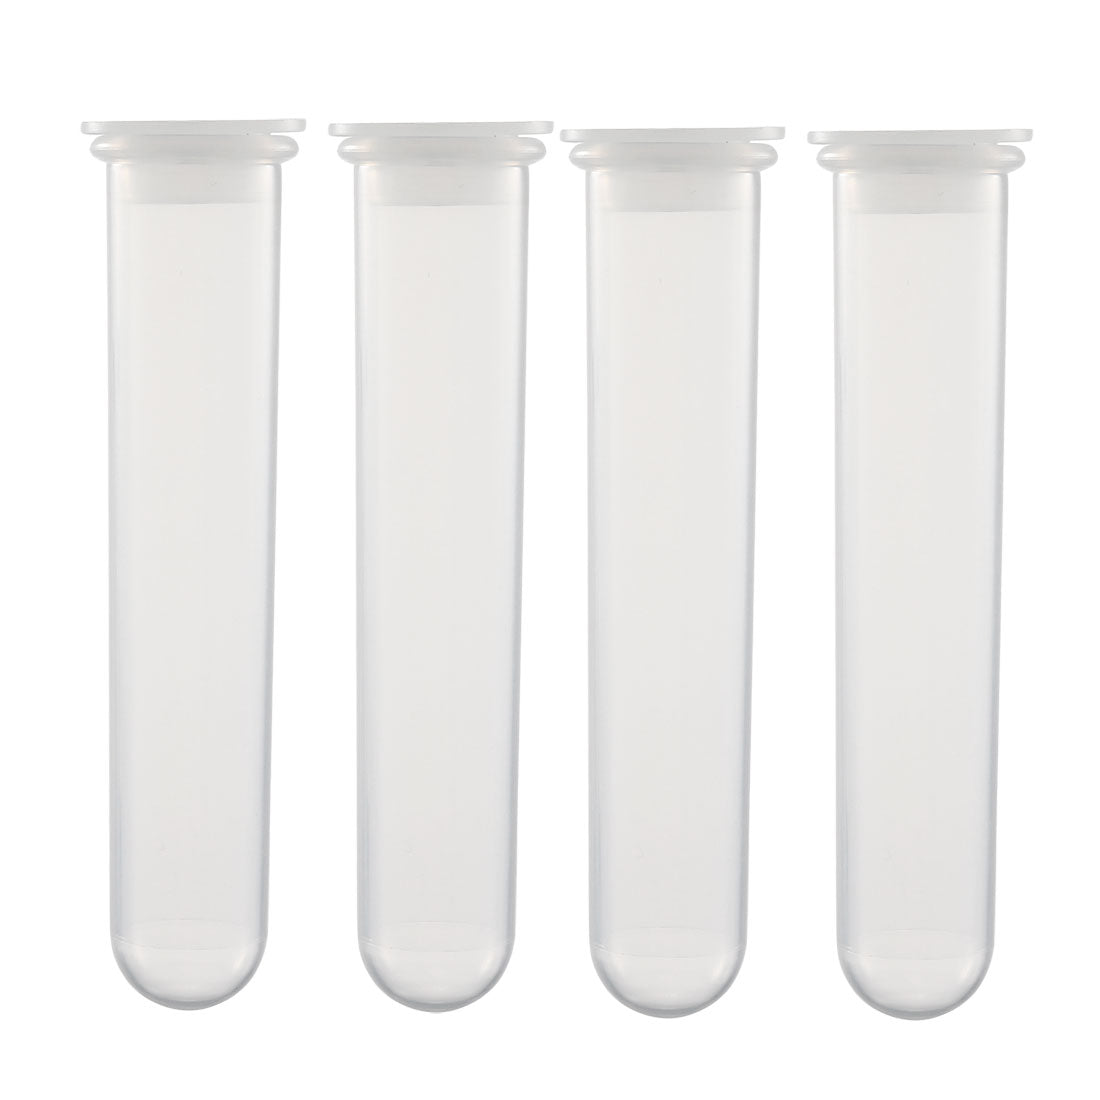 uxcell Uxcell 10 Pcs 20ml Plastic Centrifuge Tubes with Attached Cap, Round Bottom